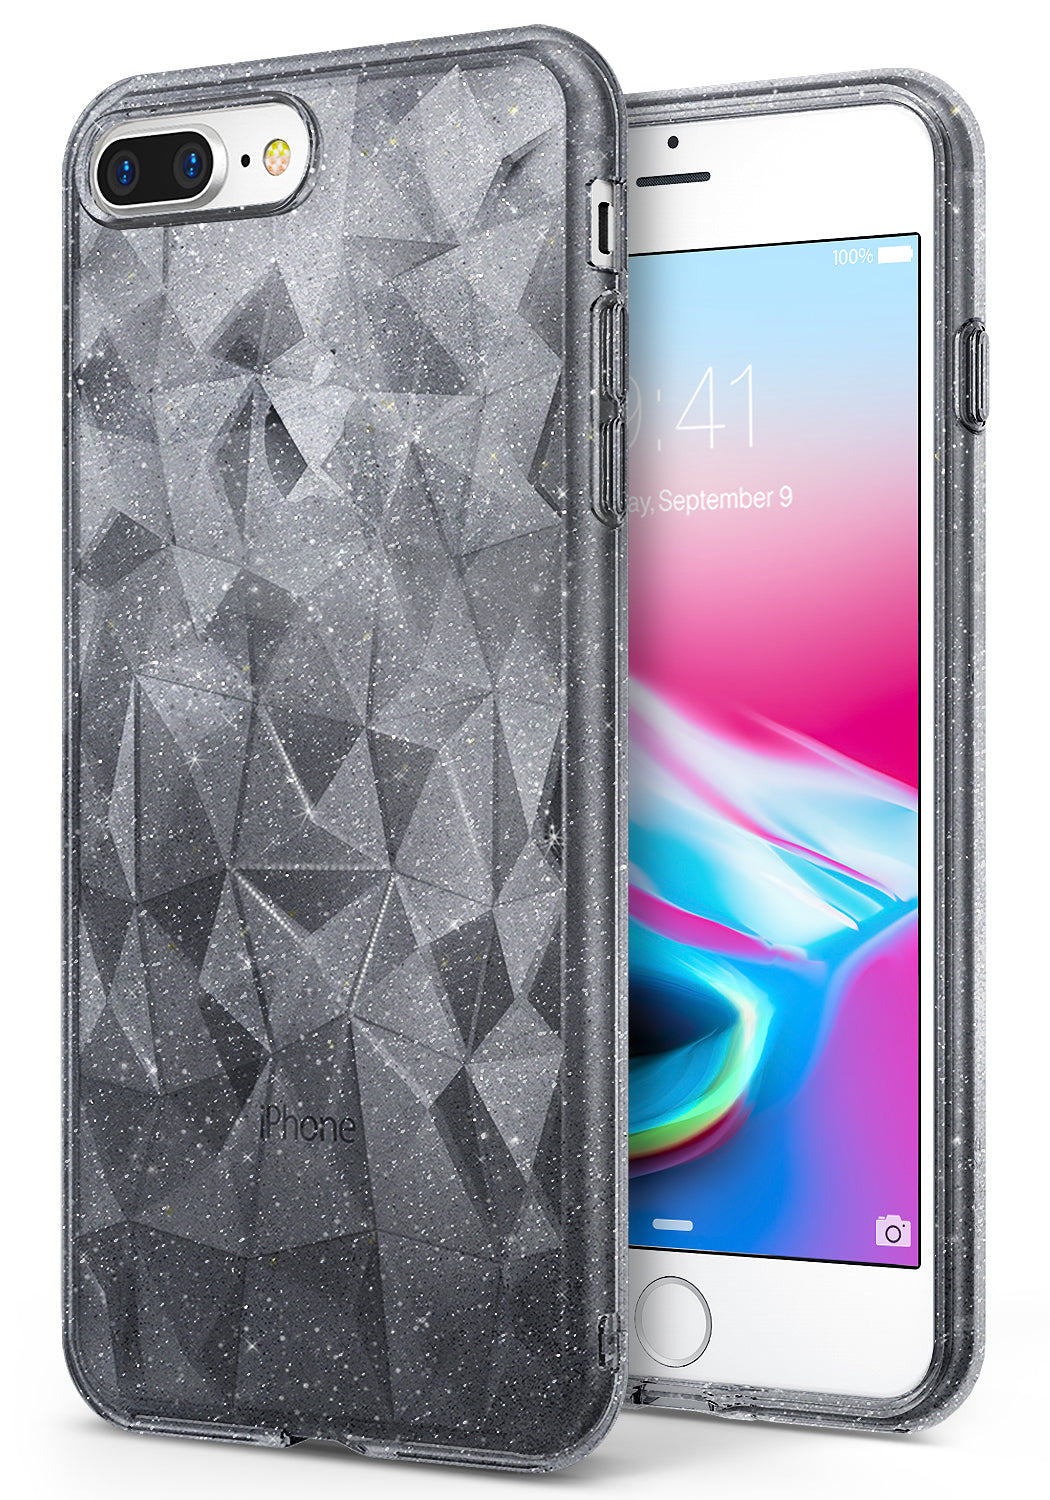 ringke air prism 3d pyramid design case cover for iphone 7 plus 8 plus main glitter gray